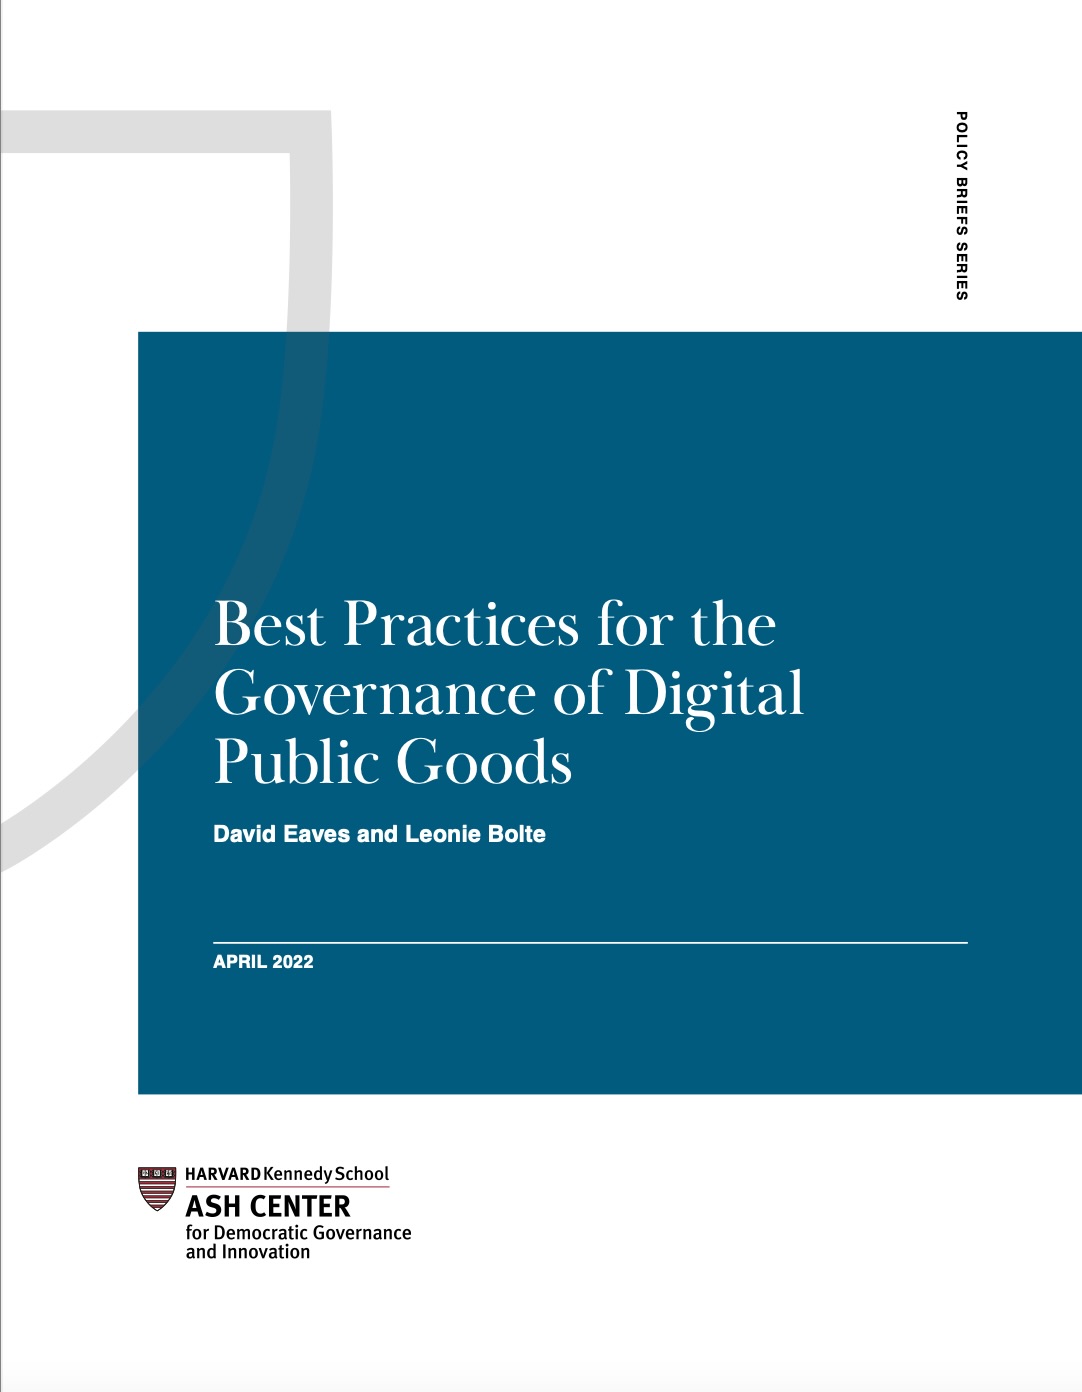 Best Practices for the Governance of Digital Public Goods